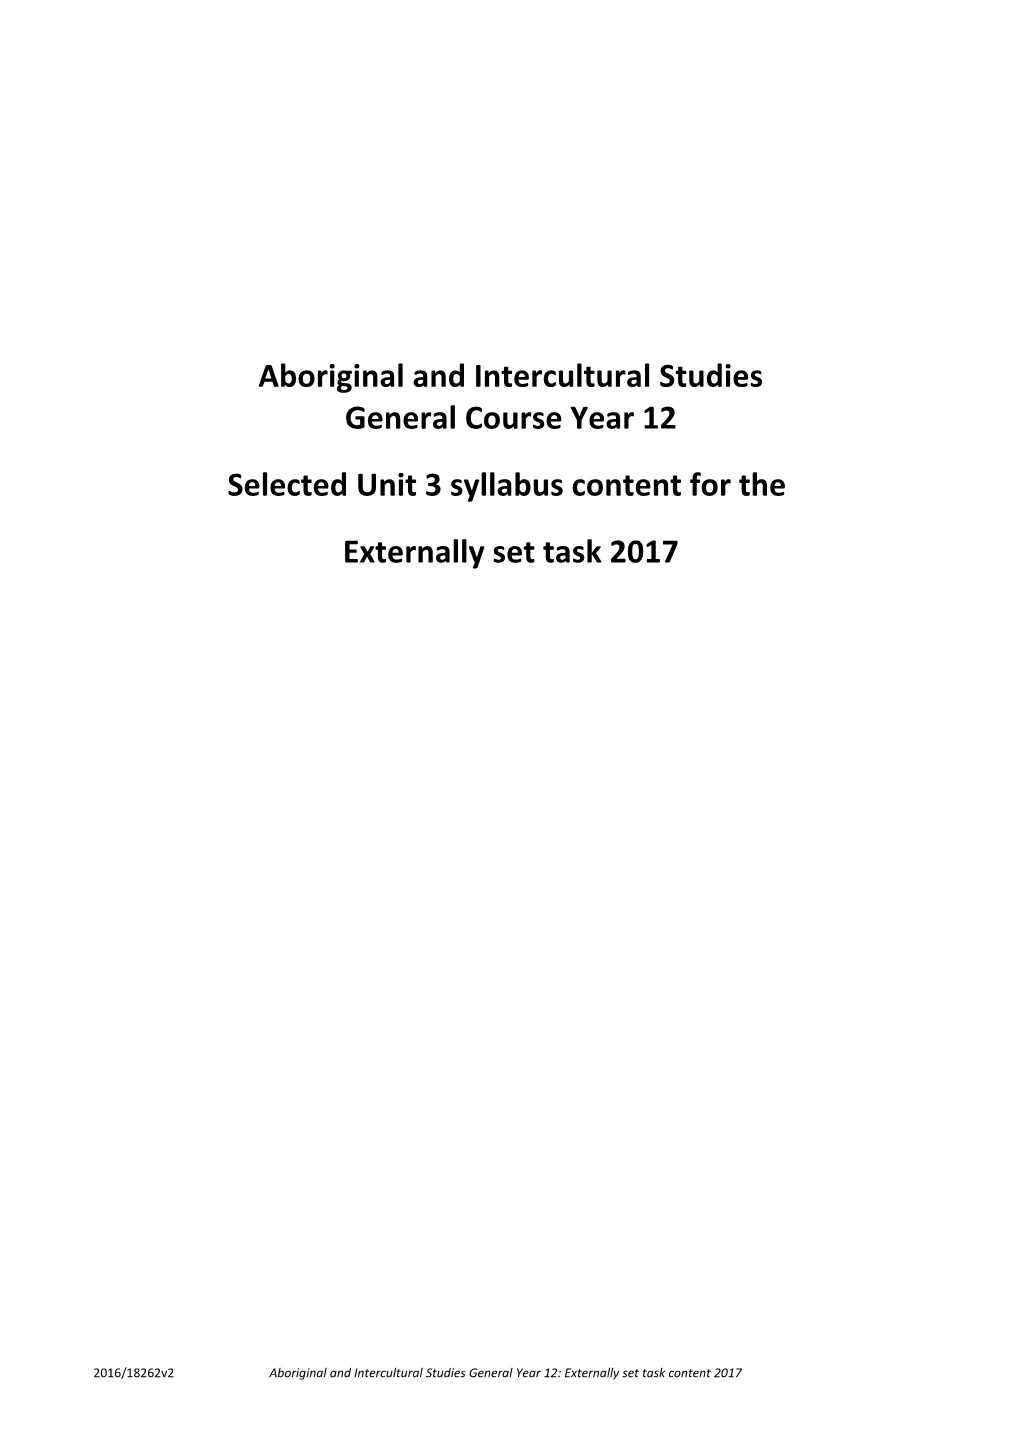 Selected Unit 3 Syllabus Content for The